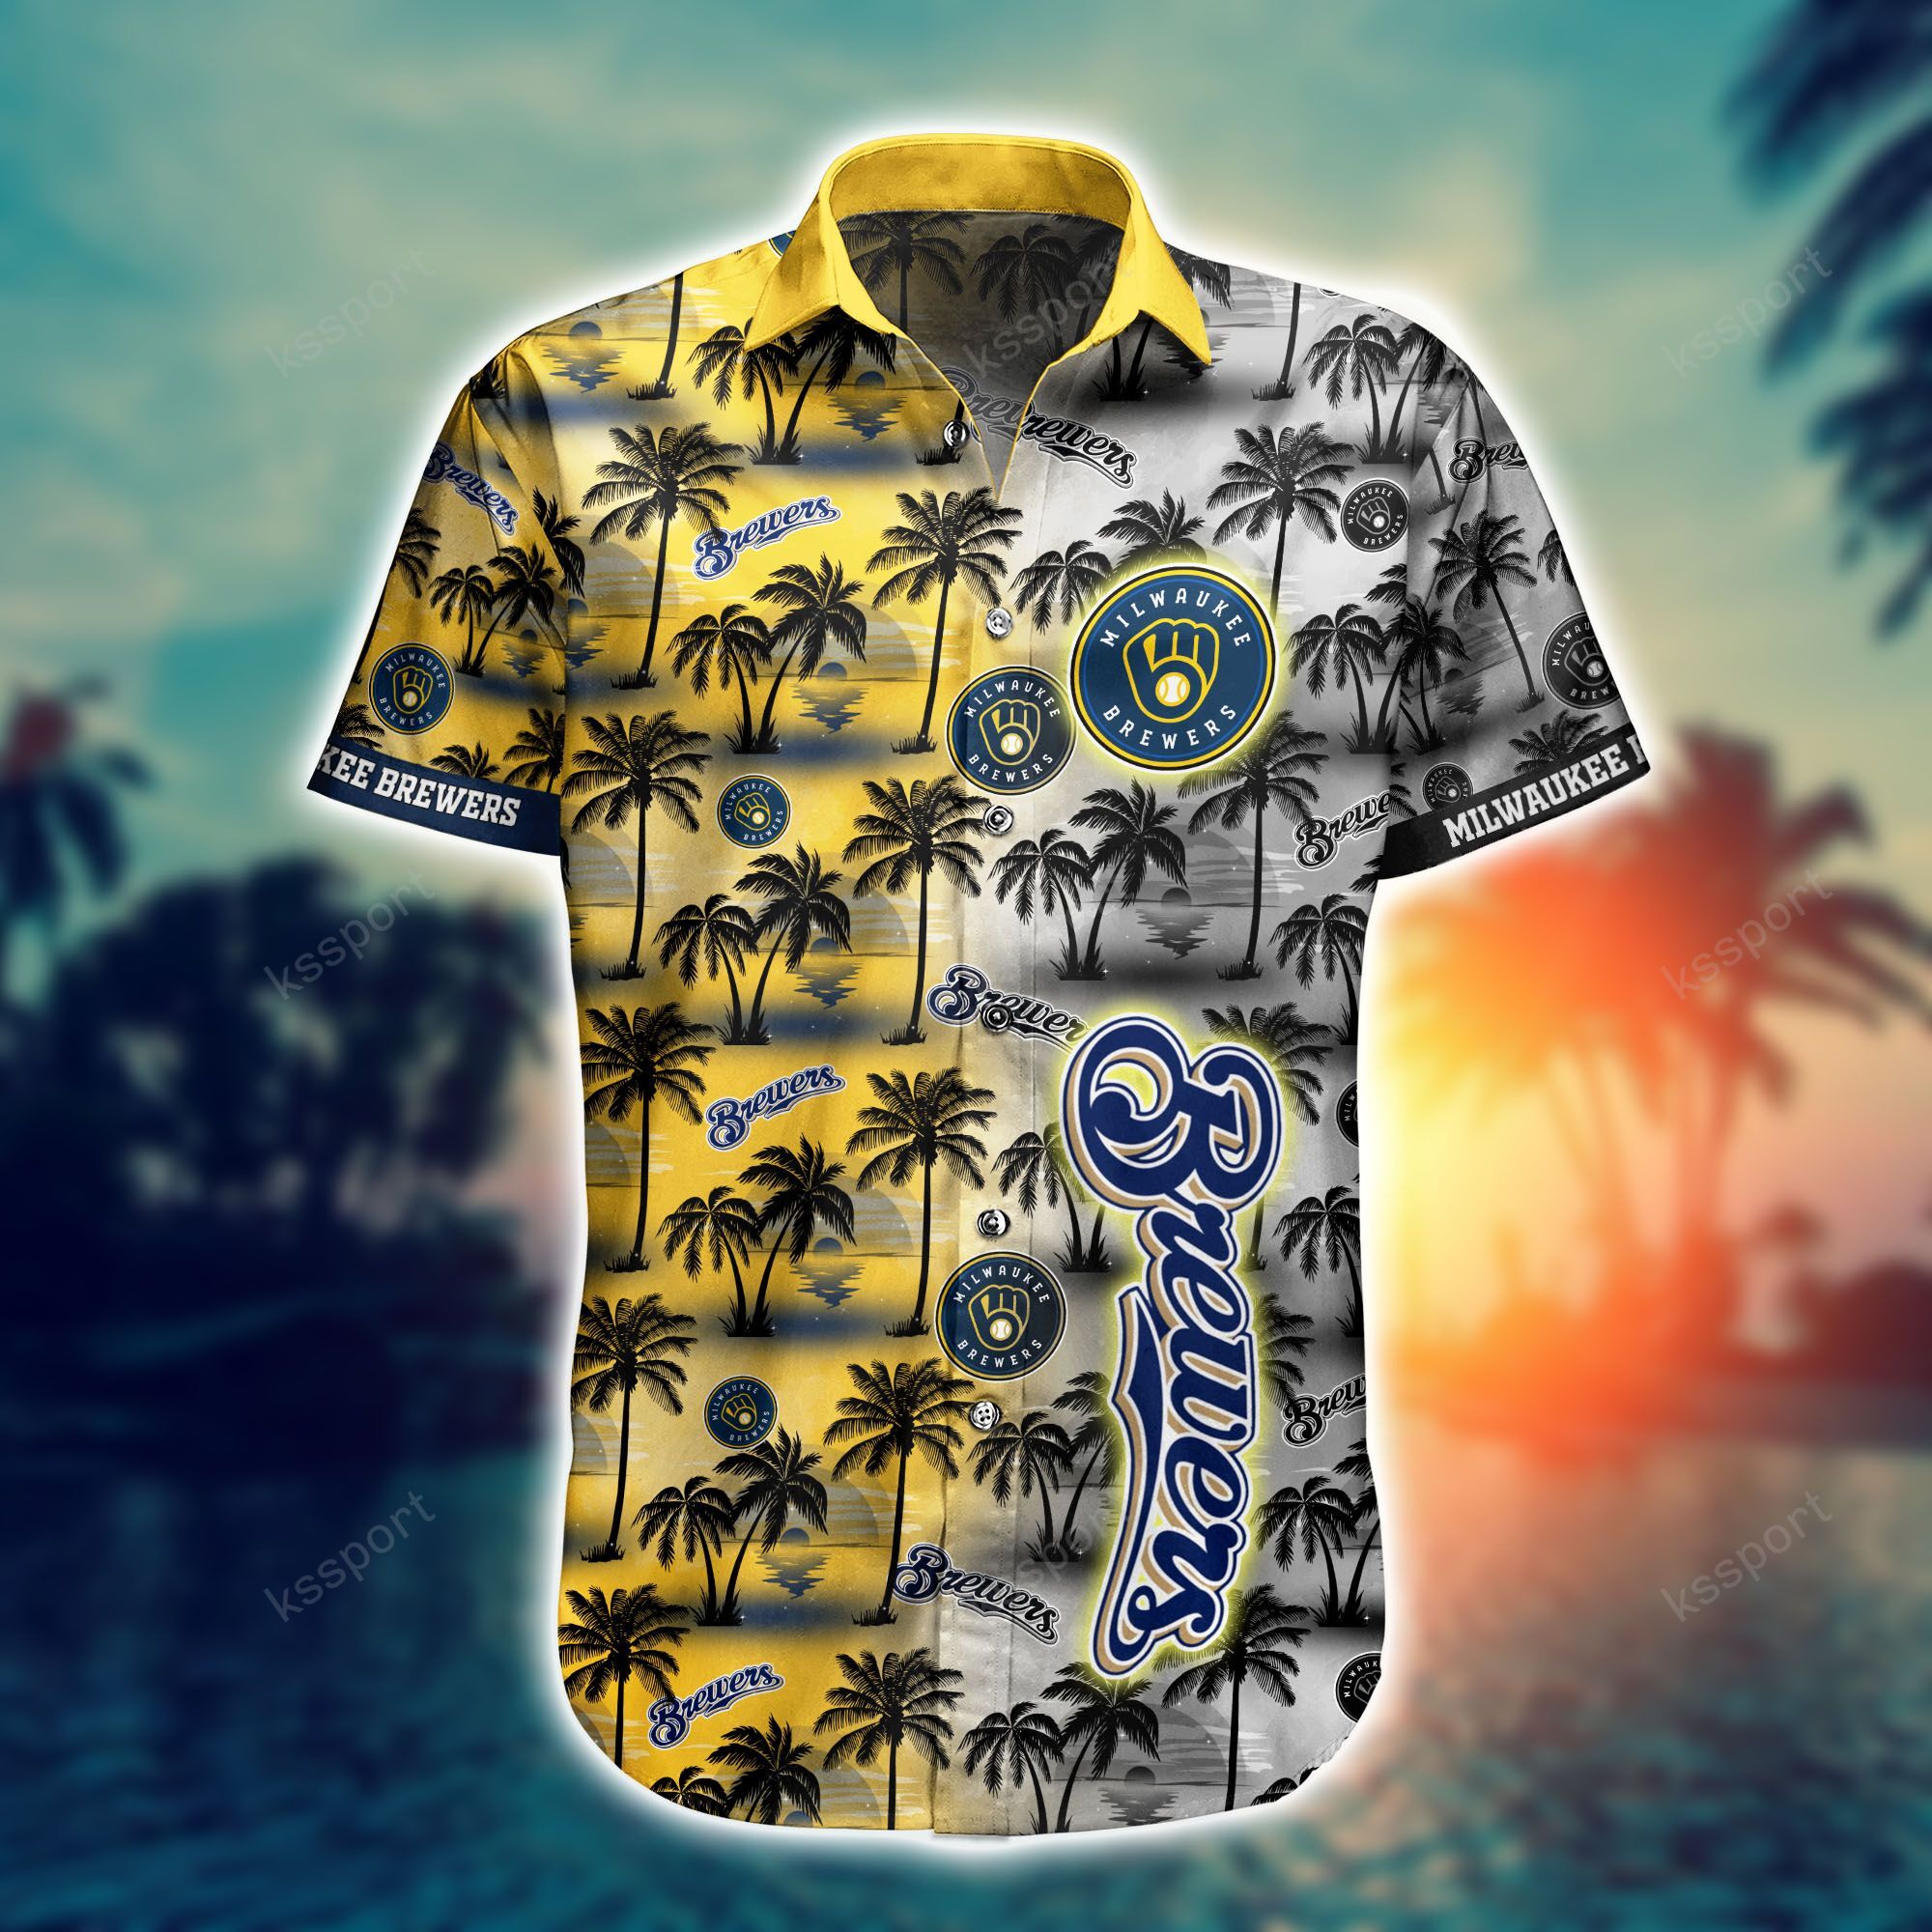 Top cool Hawaiian shirt 2022 - Make sure you get yours today before they run out! 224